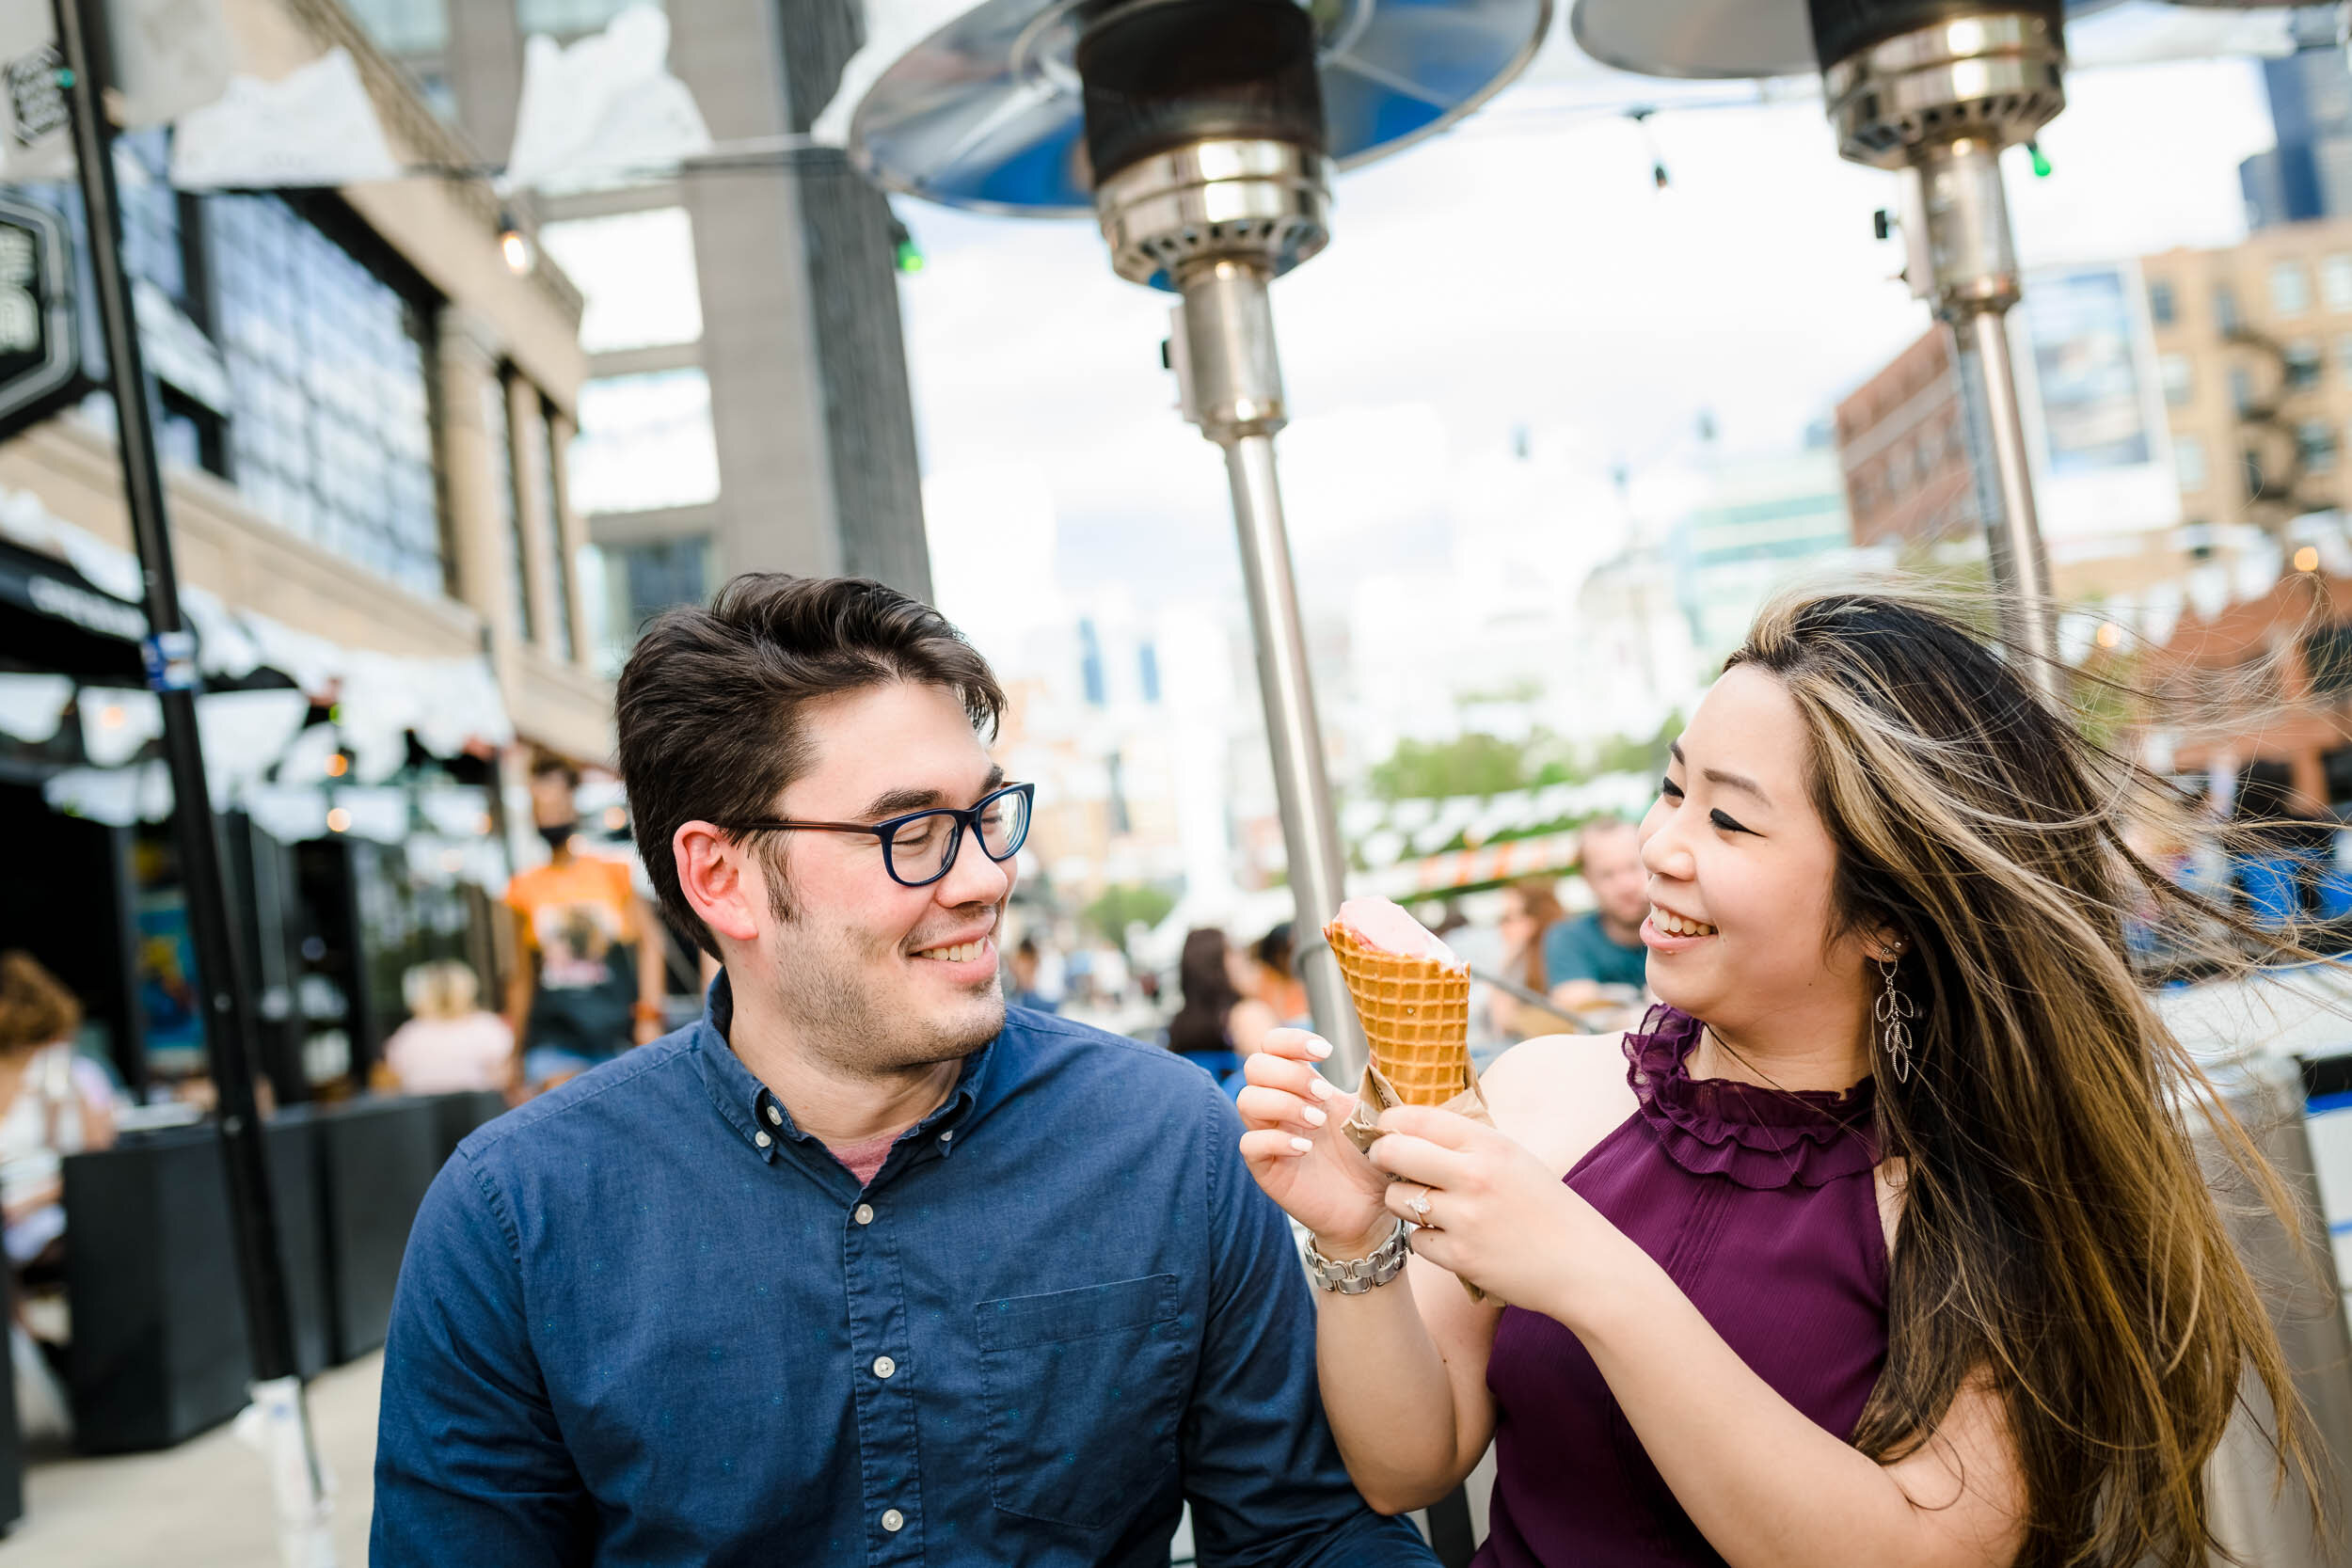 Engagement Photographer Chicago | Jeni's Ice Cream | J. Brown Photography | couple share an ice cream cone.